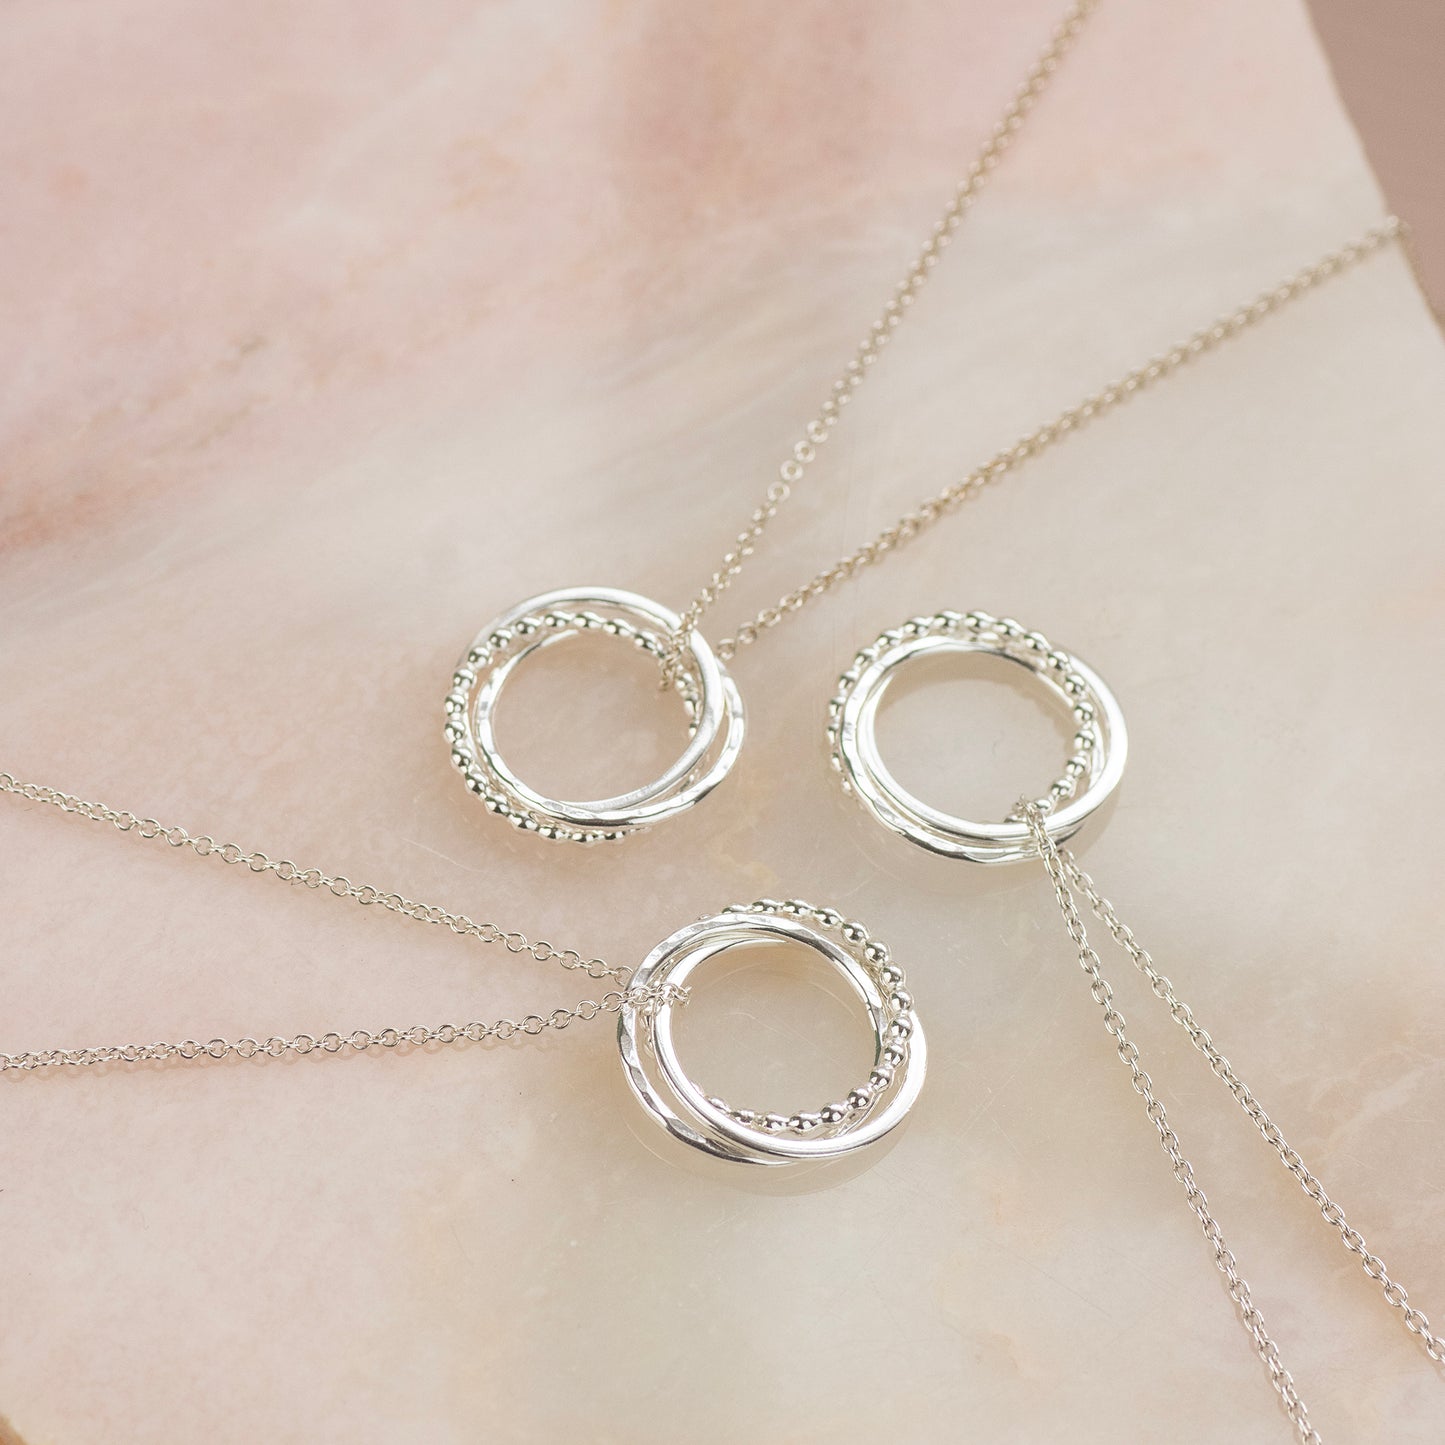 Christmas Gift for Friend - 3 Rings for 3 Friends